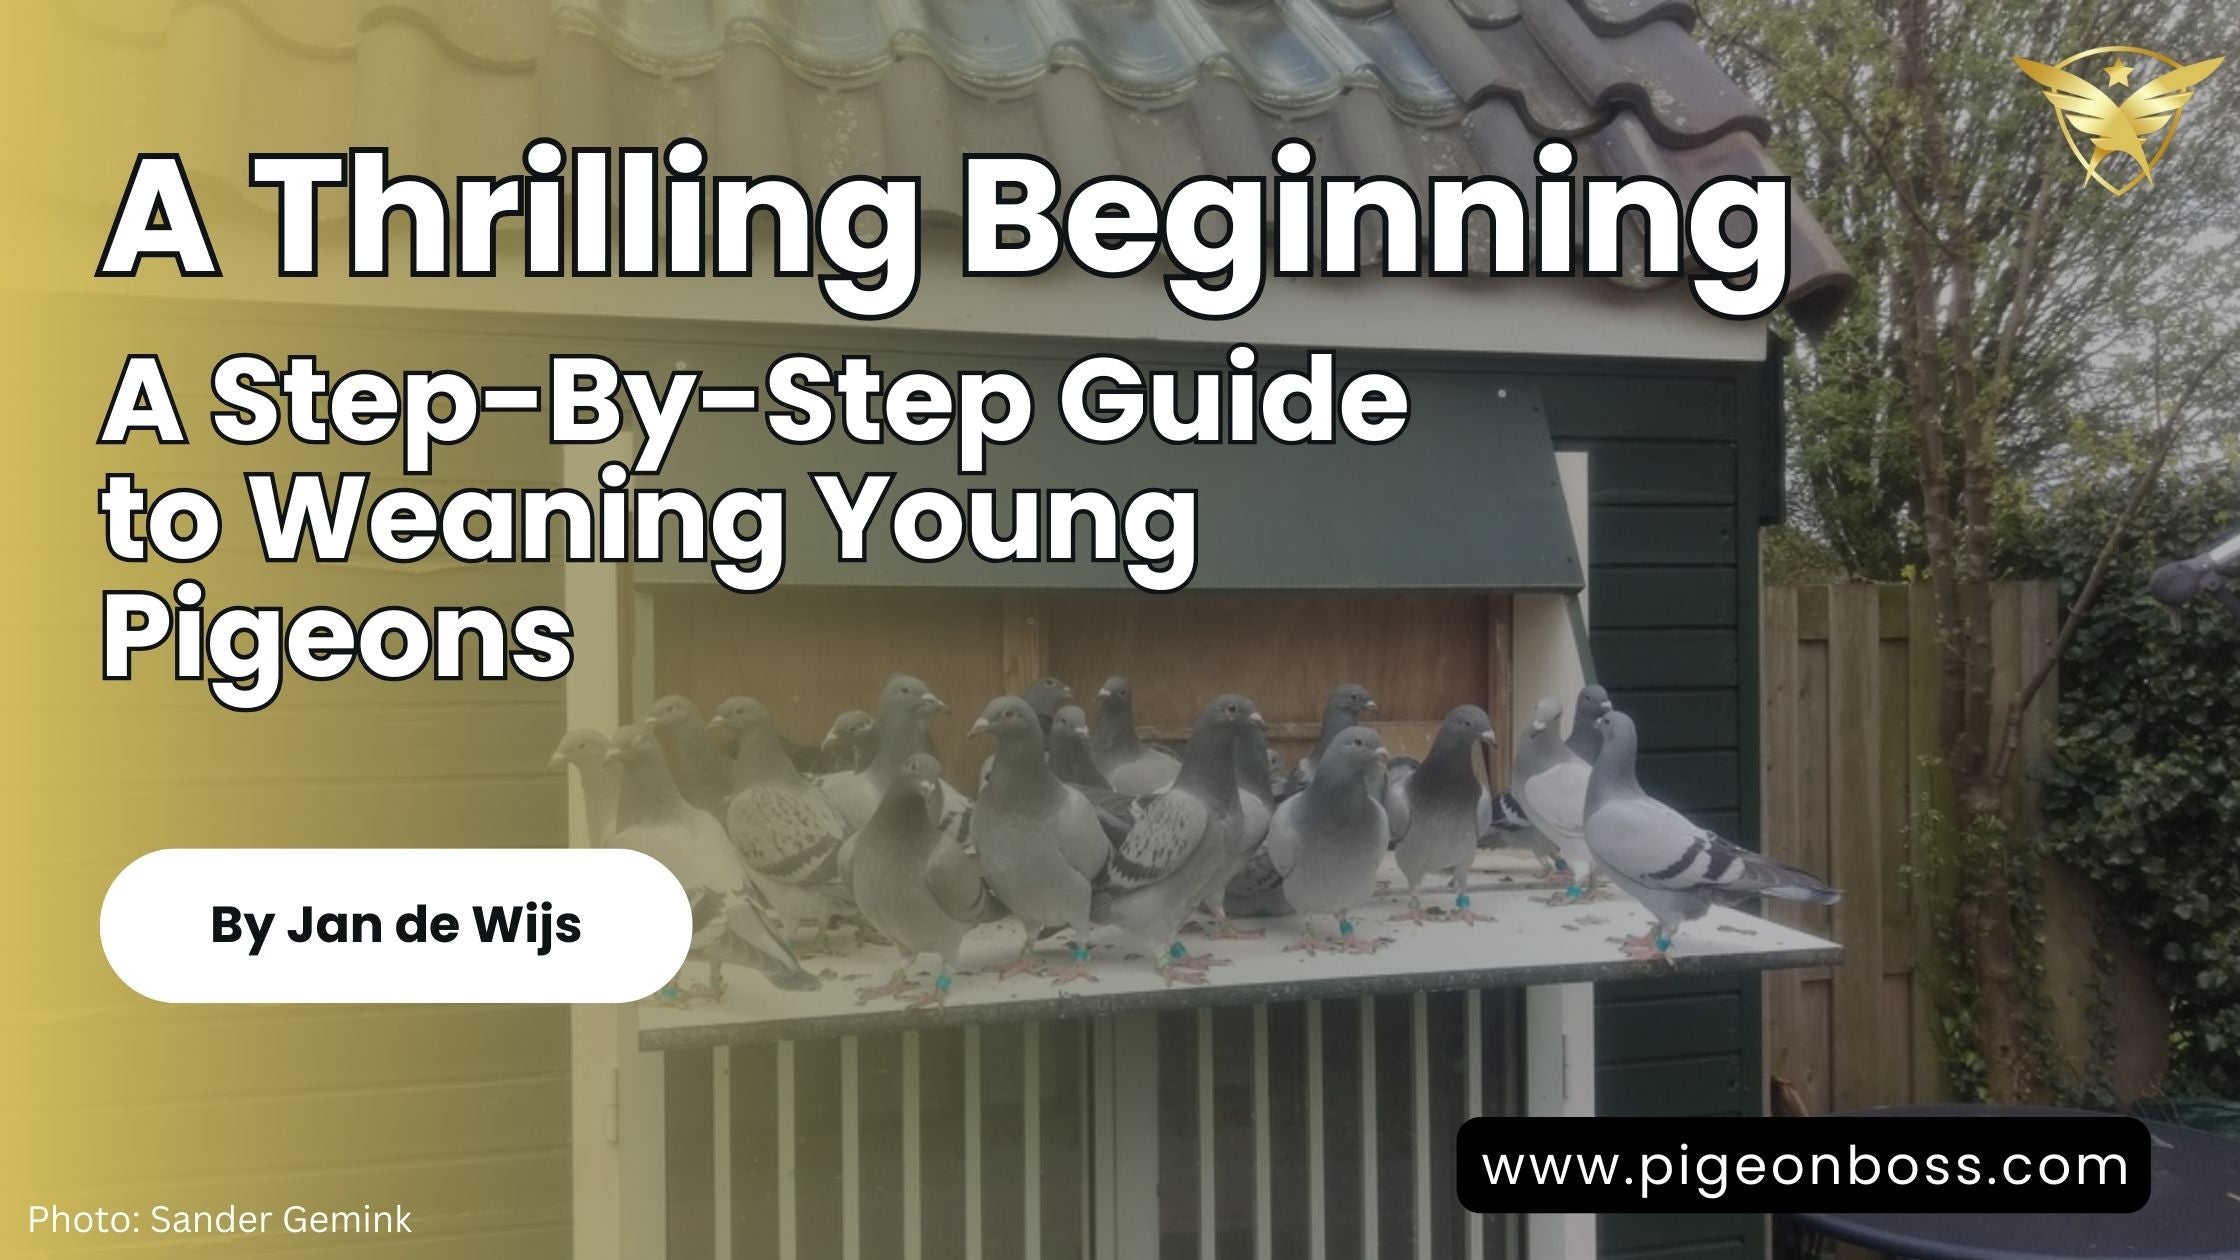 A Thrilling Beginning: A Step-By-Step Guide to Weaning Young Pigeons